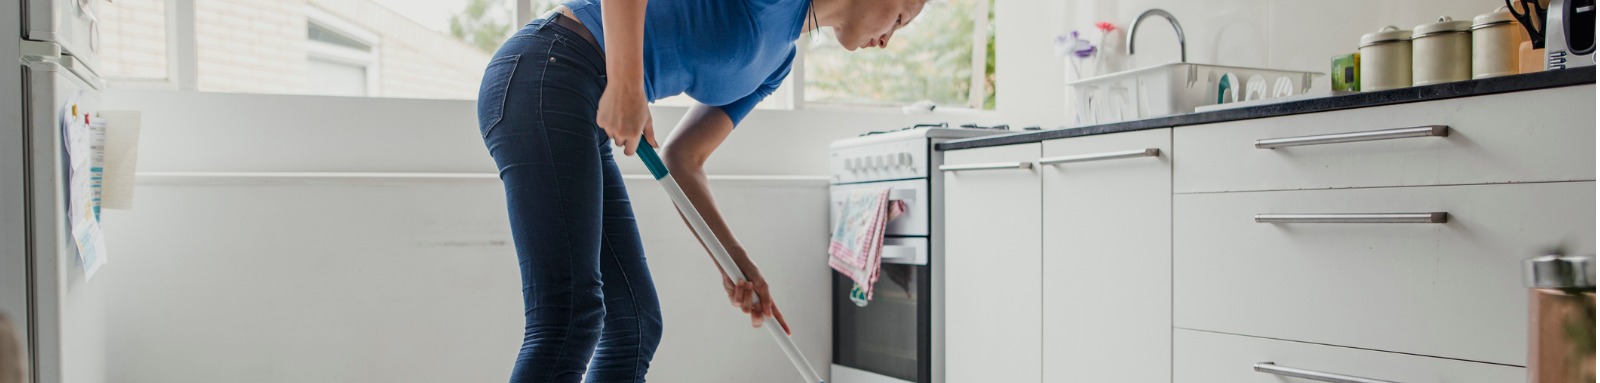 Woman mopping kitchen floor 